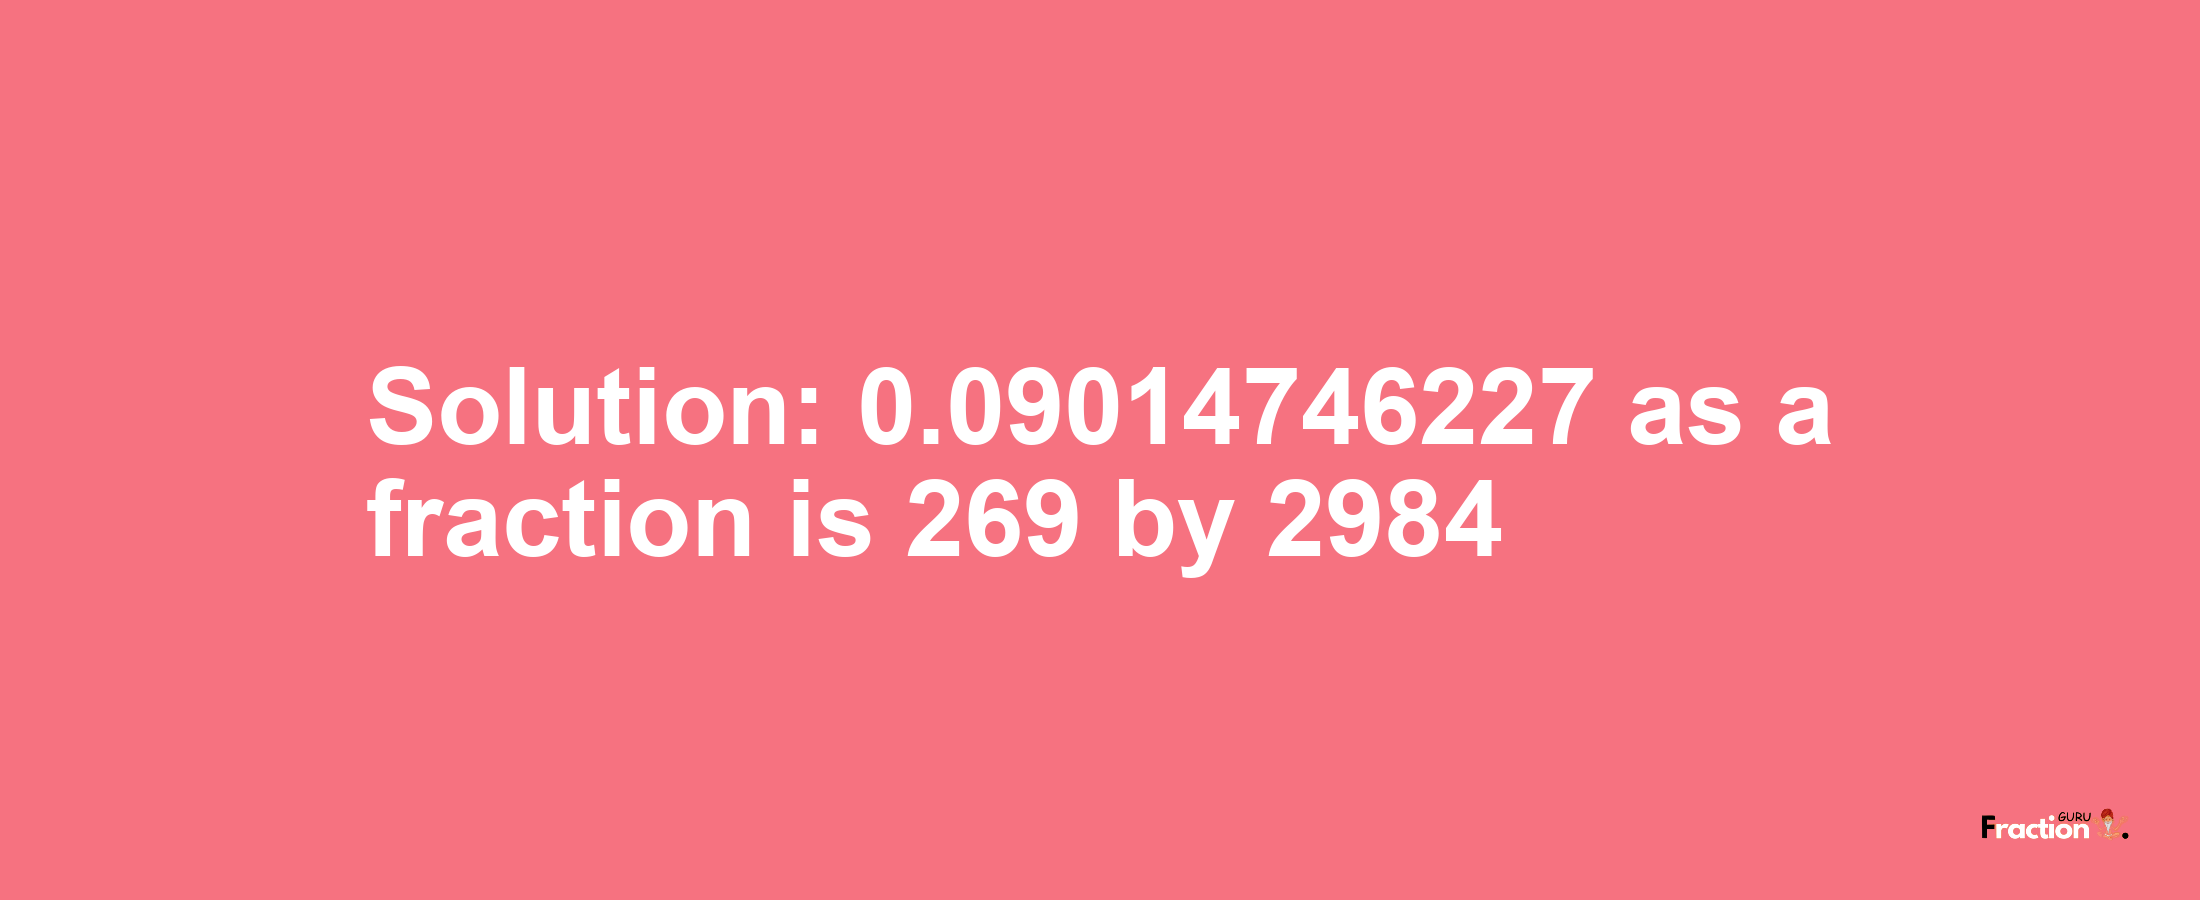 Solution:0.09014746227 as a fraction is 269/2984